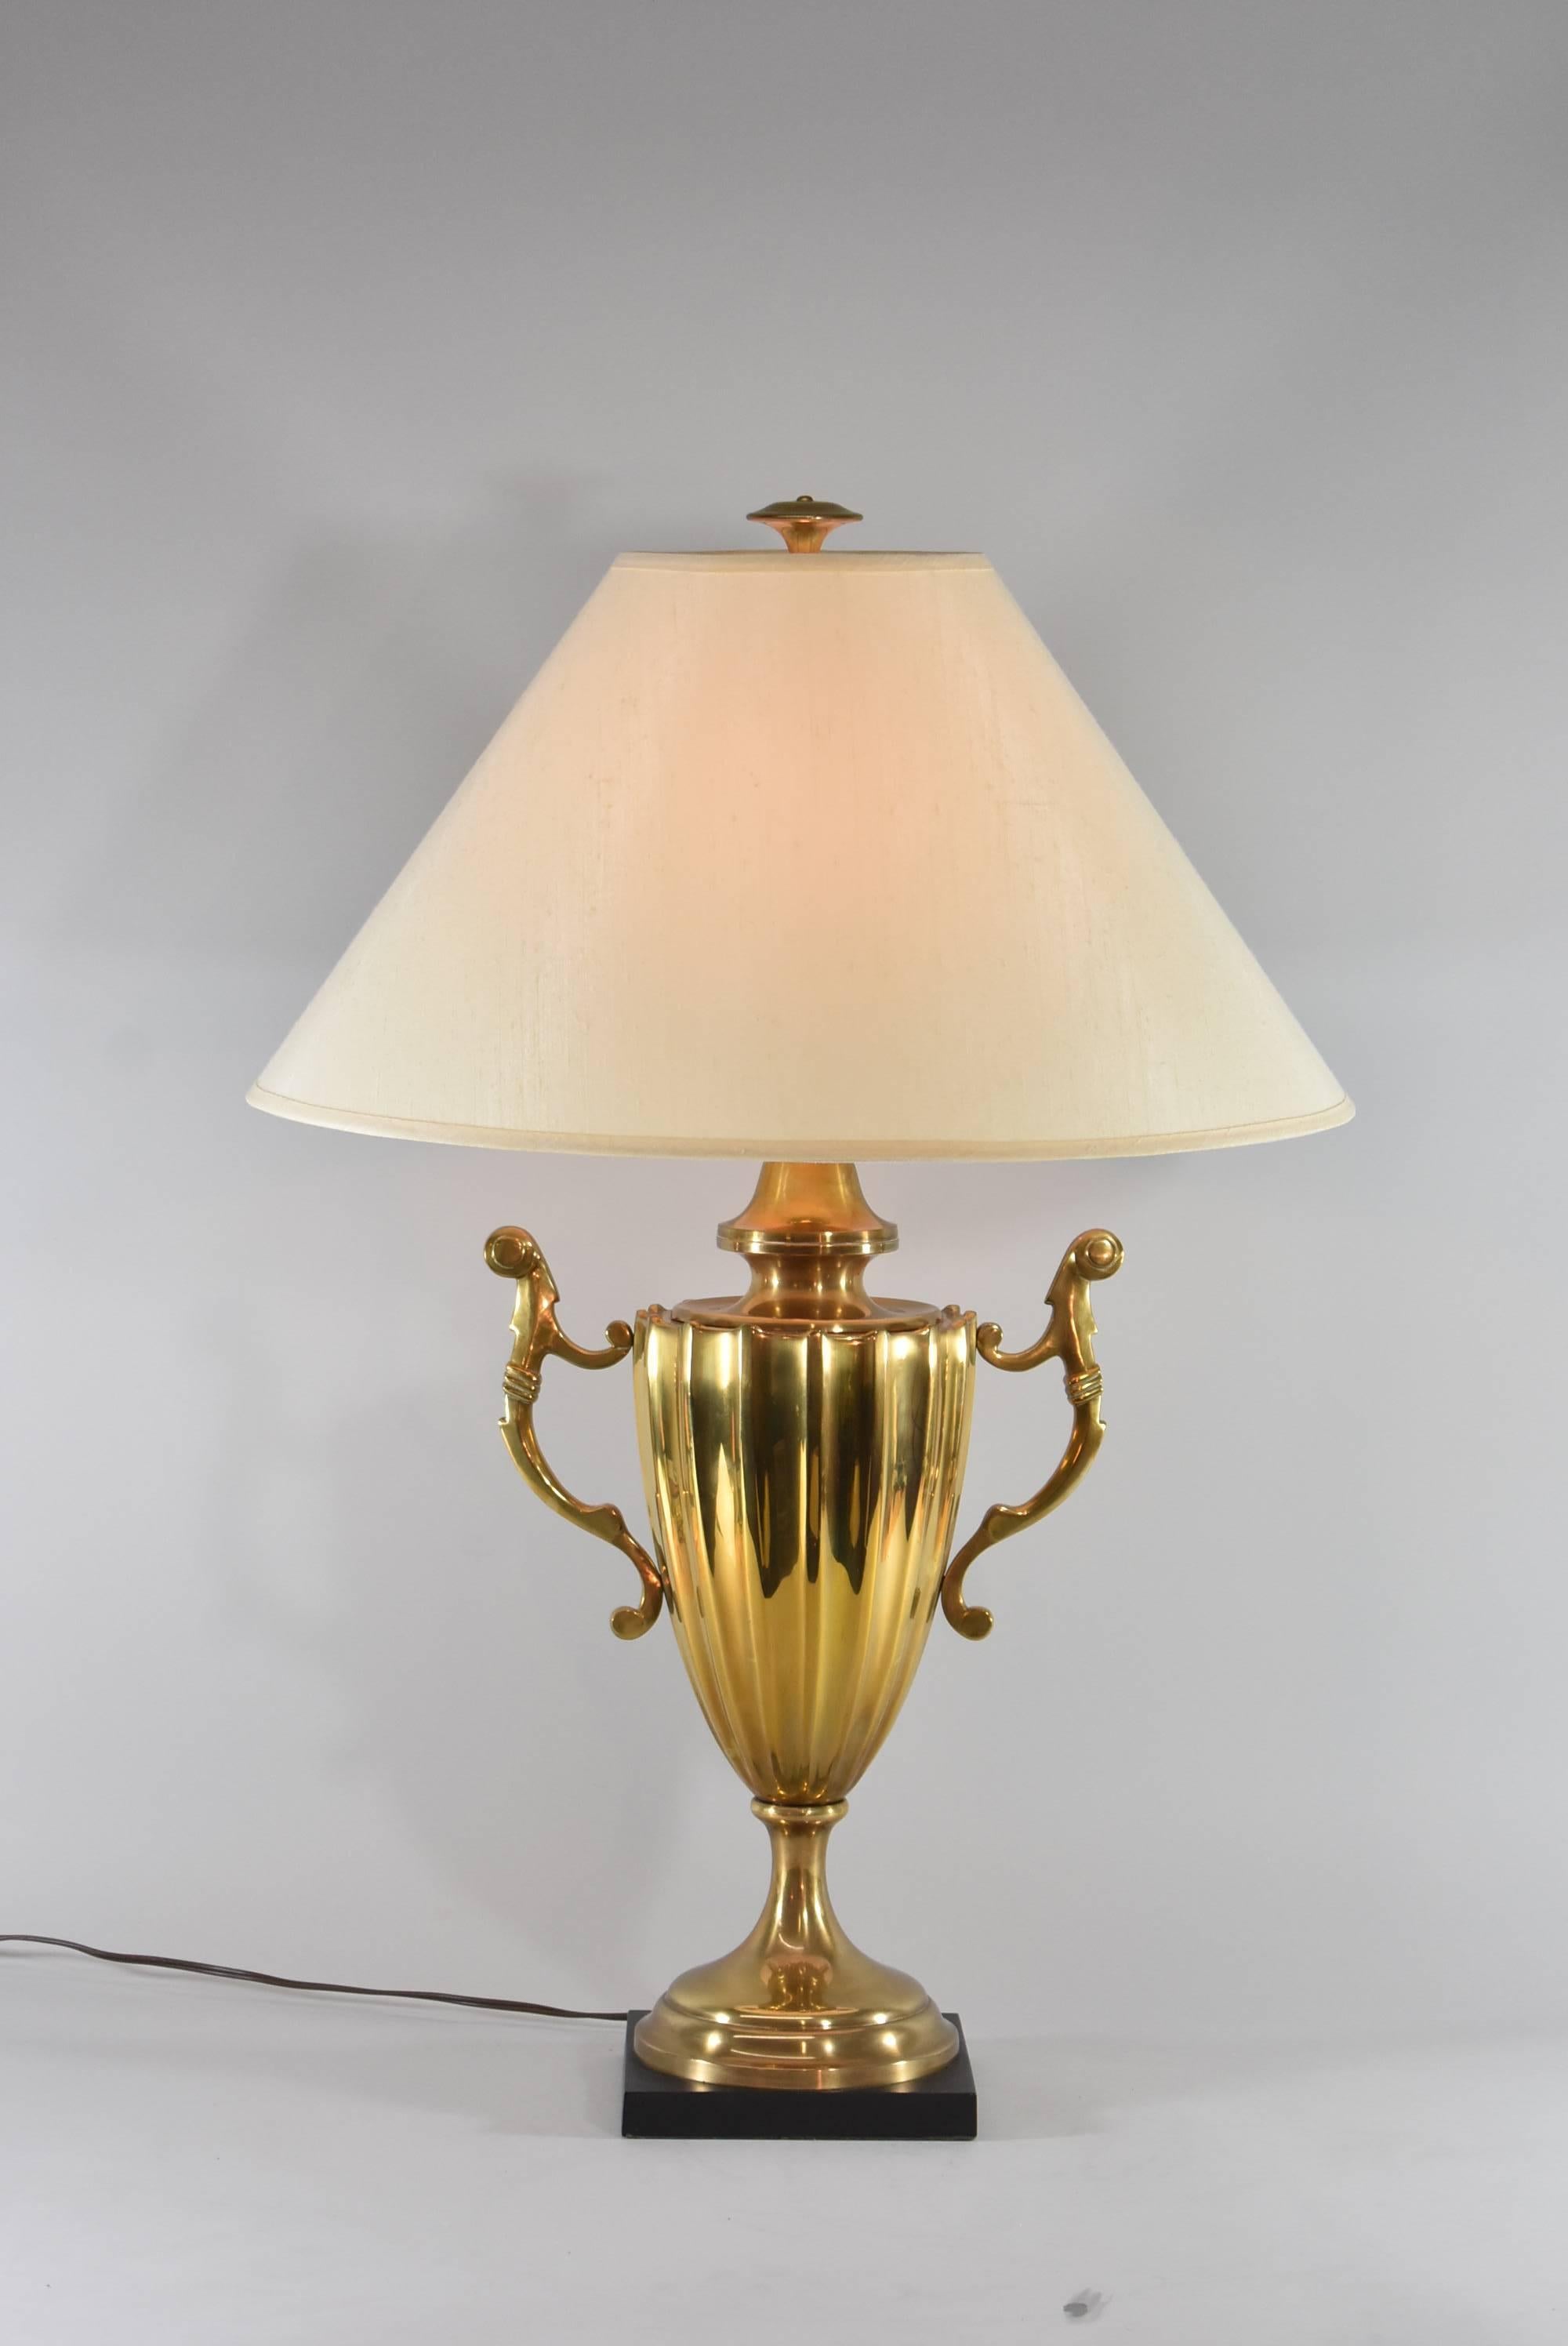 Regency Pair of Large Scale Urn Form Brass Table Lamps by Chapman, 1985